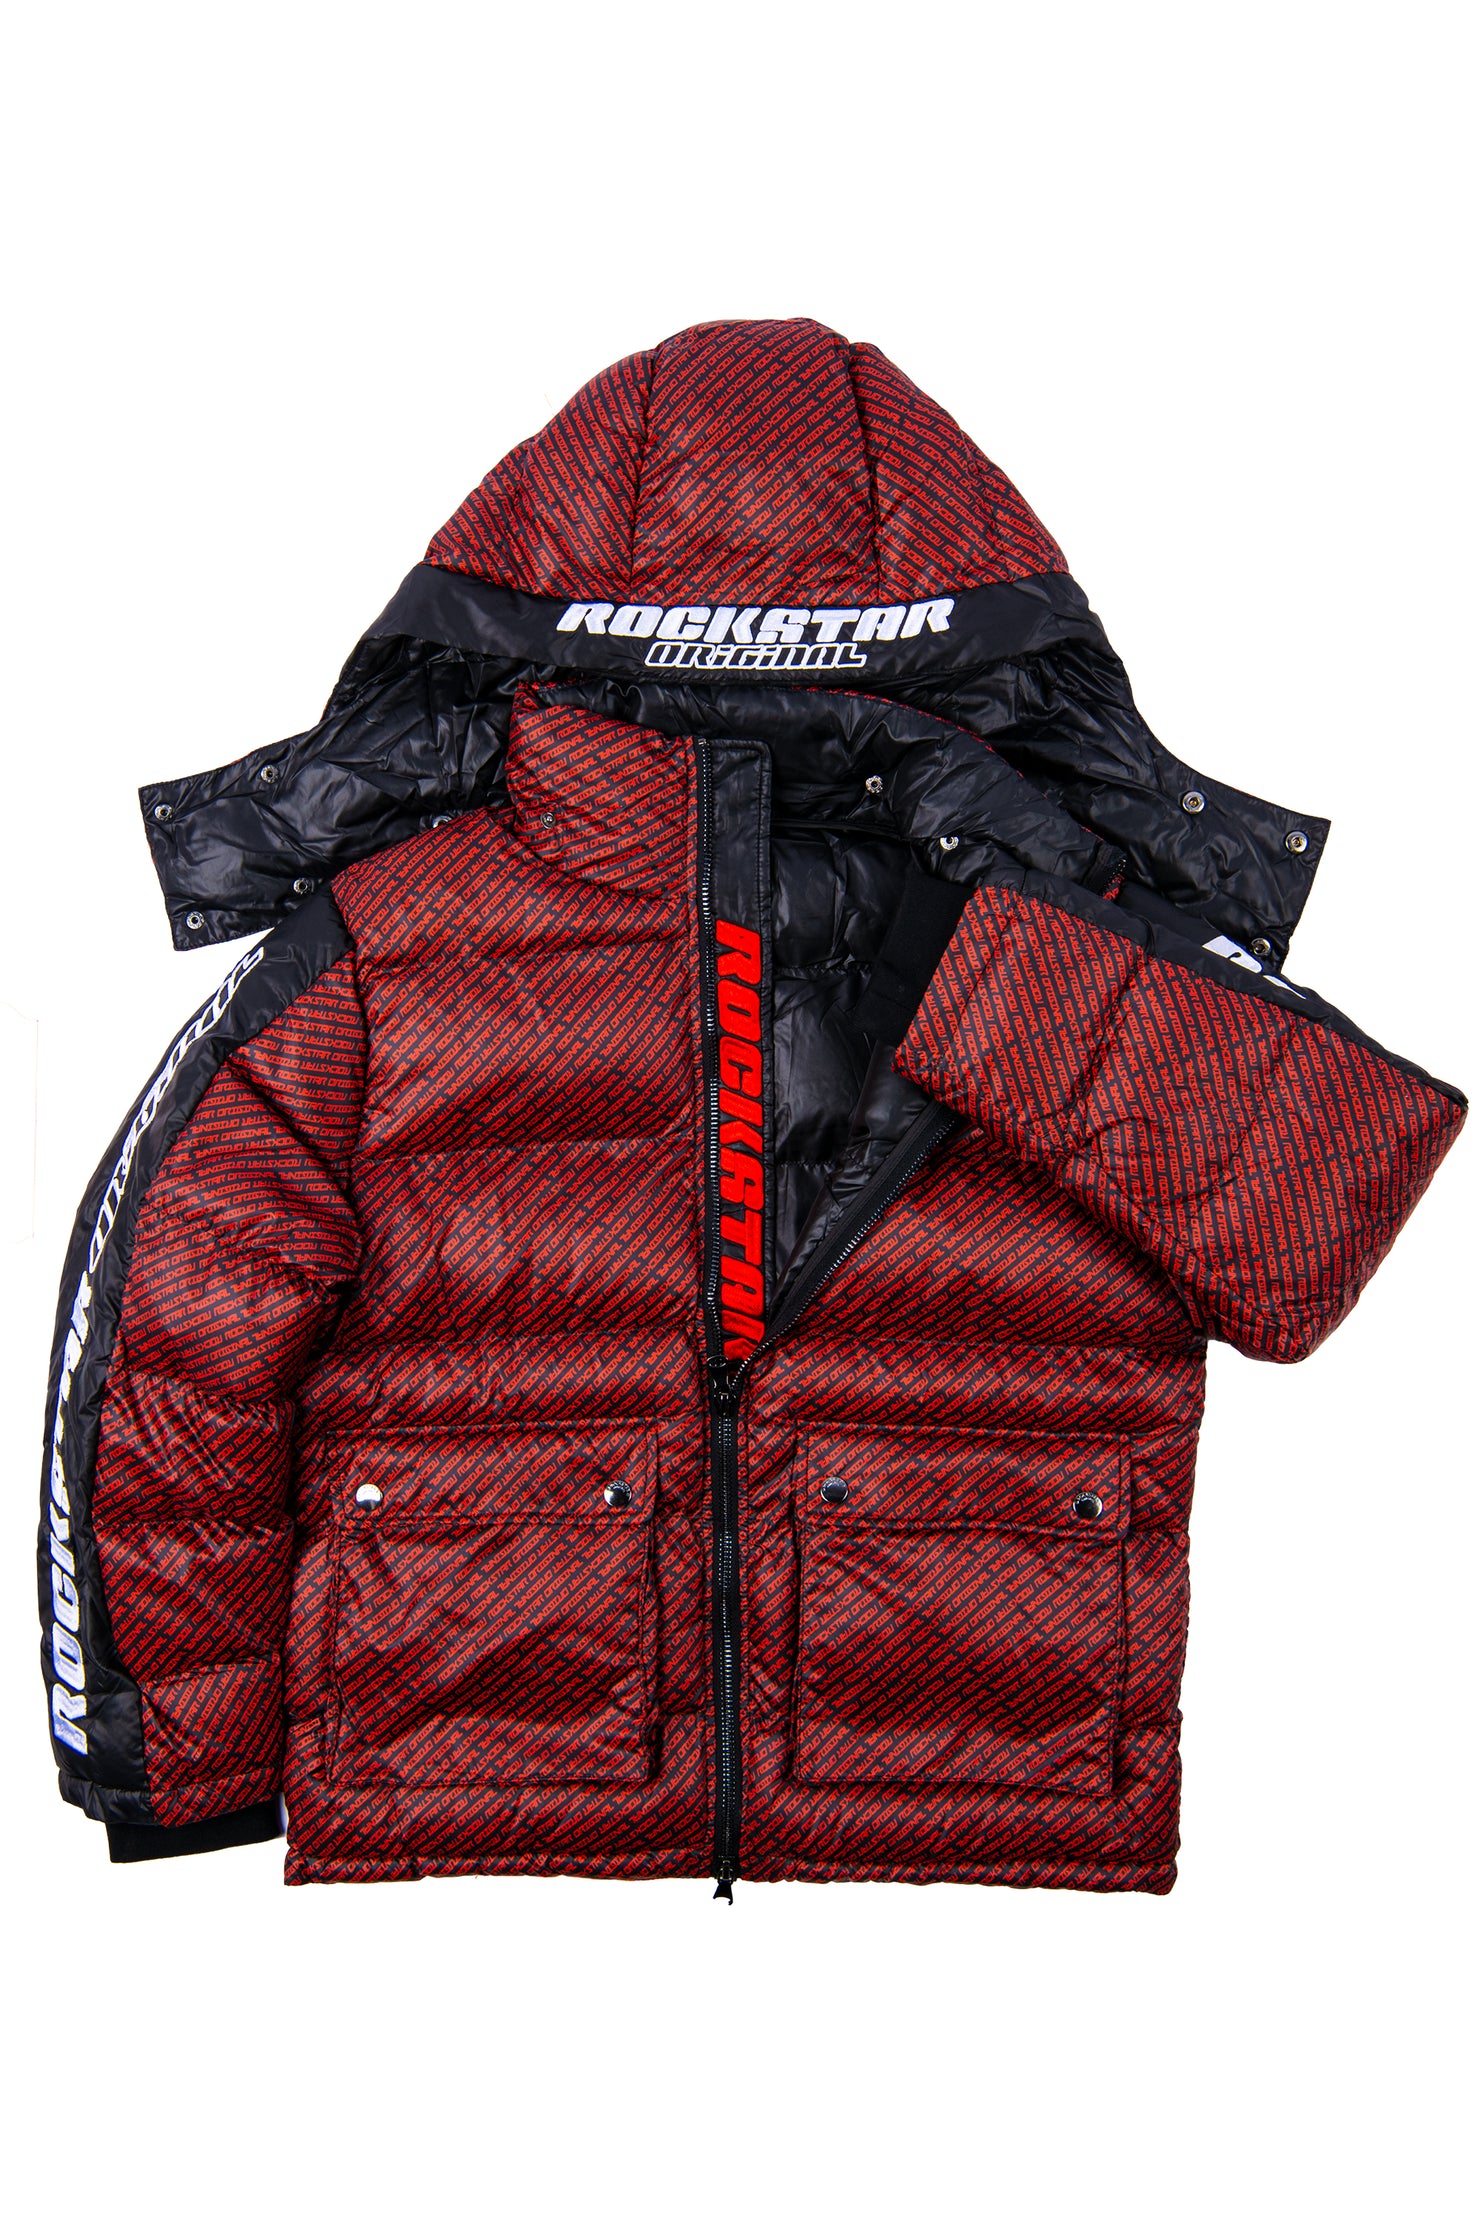 Bryson Puffer Jacket- Red/Blk